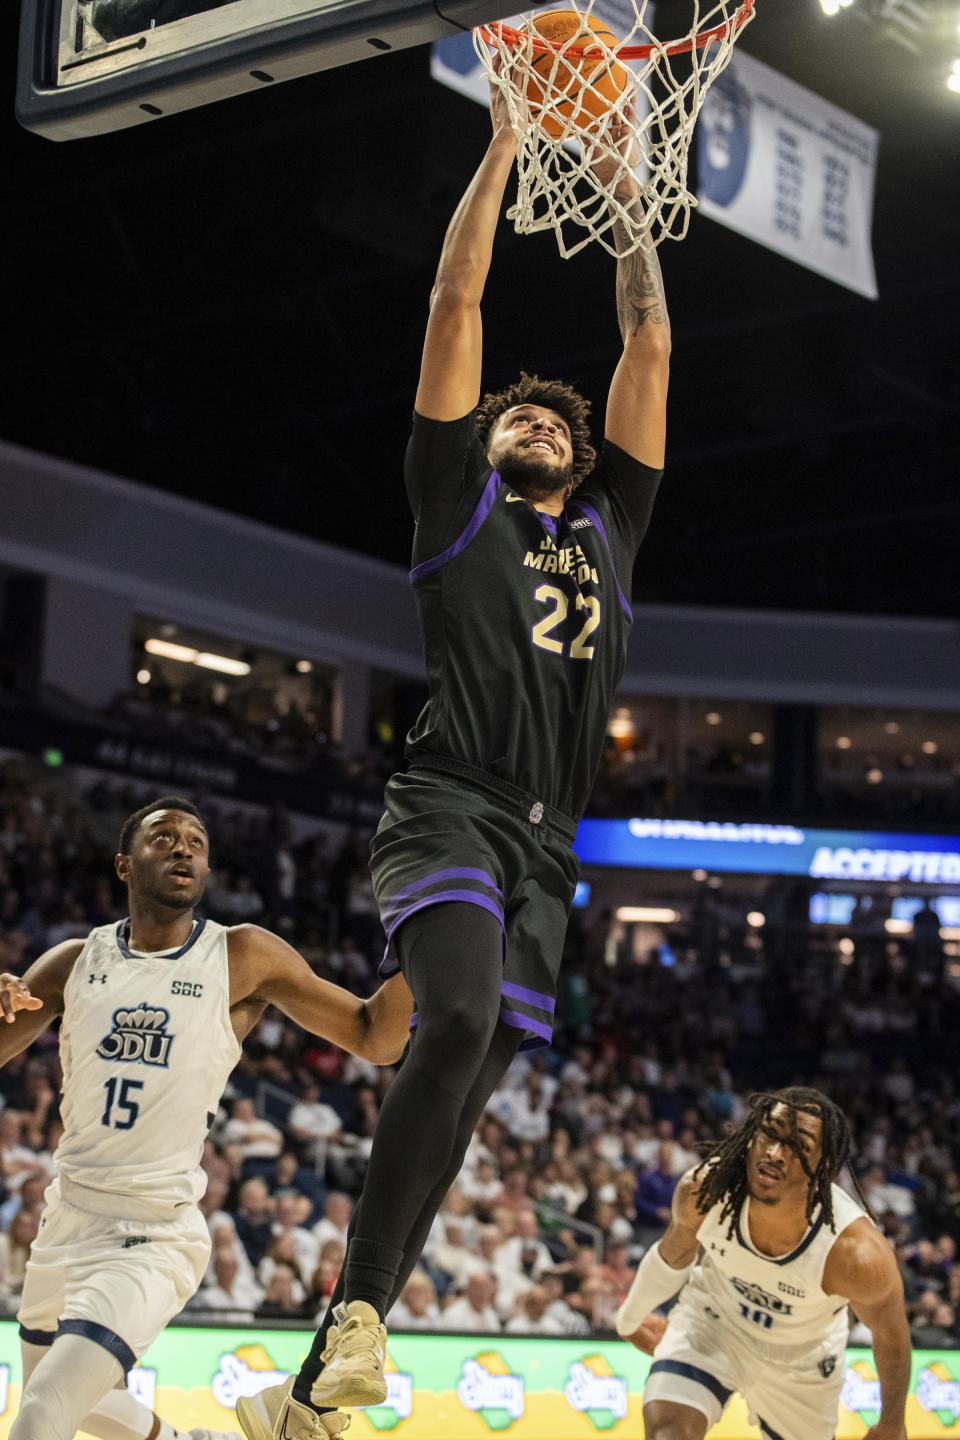 TJ Bickerstaff scores 21 to lead No. 18 James Madison over Old Dominion ...